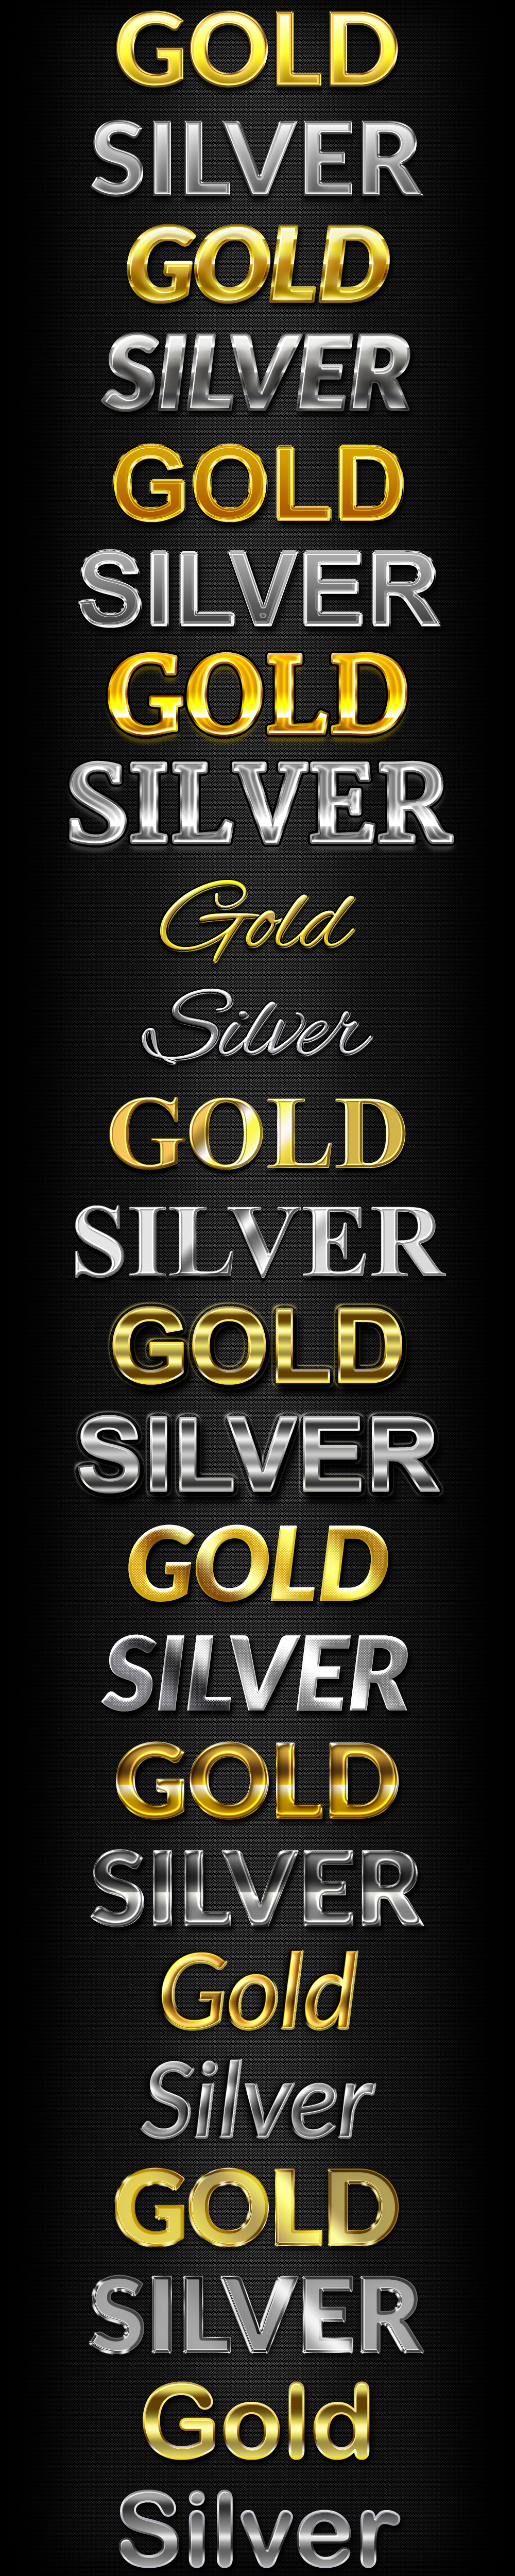 gold-silver-text-styles